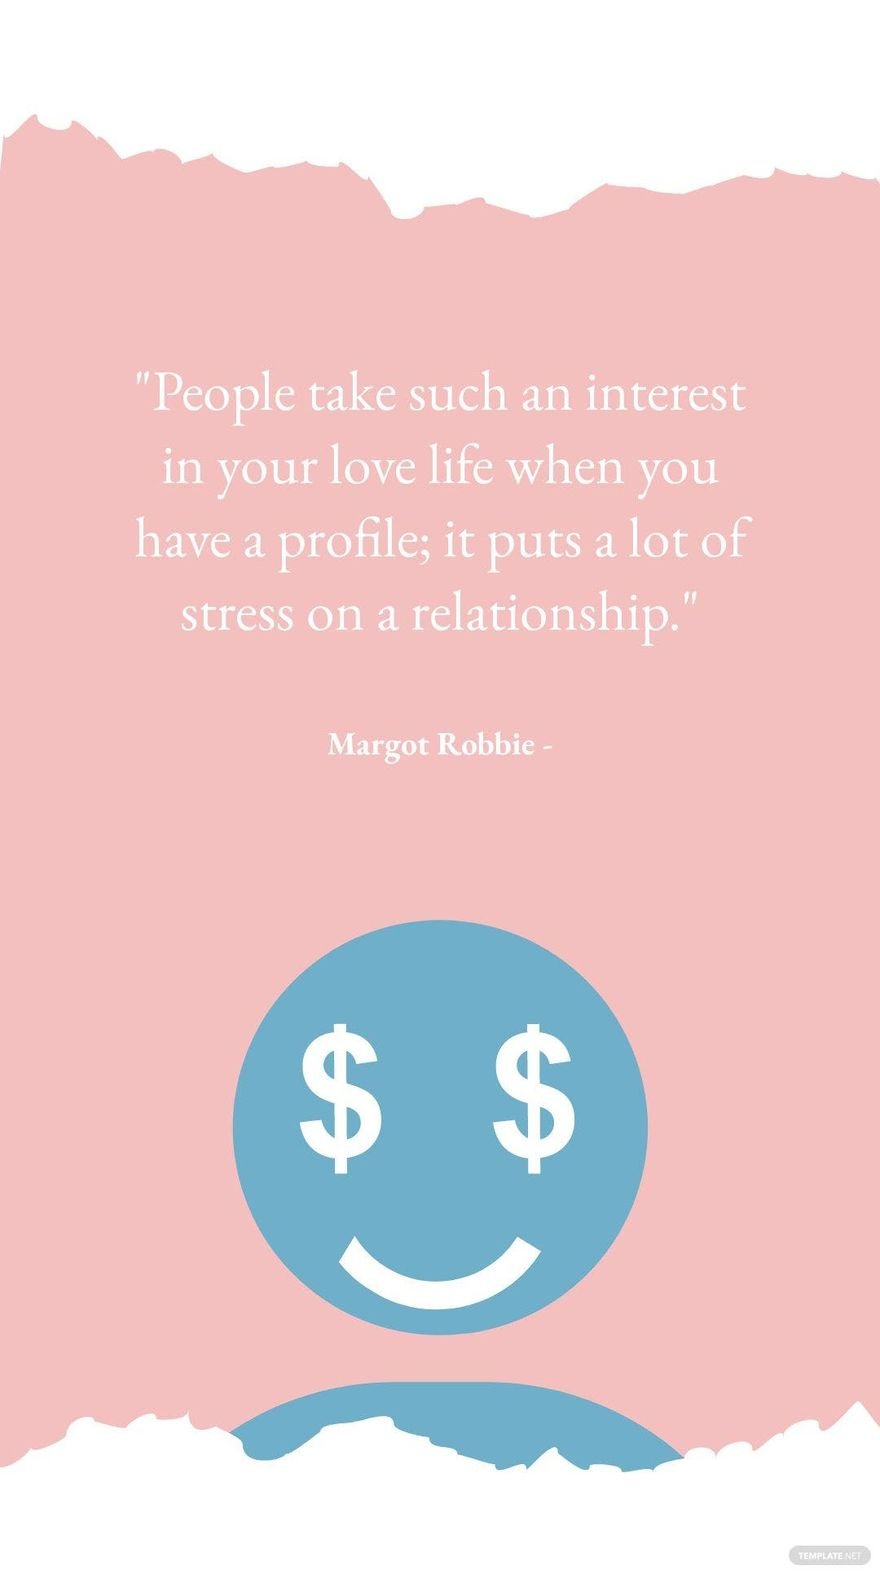 Margot Robbie - People take such an interest in your love life when you have a profile; it puts a lot of stress on a relationship.